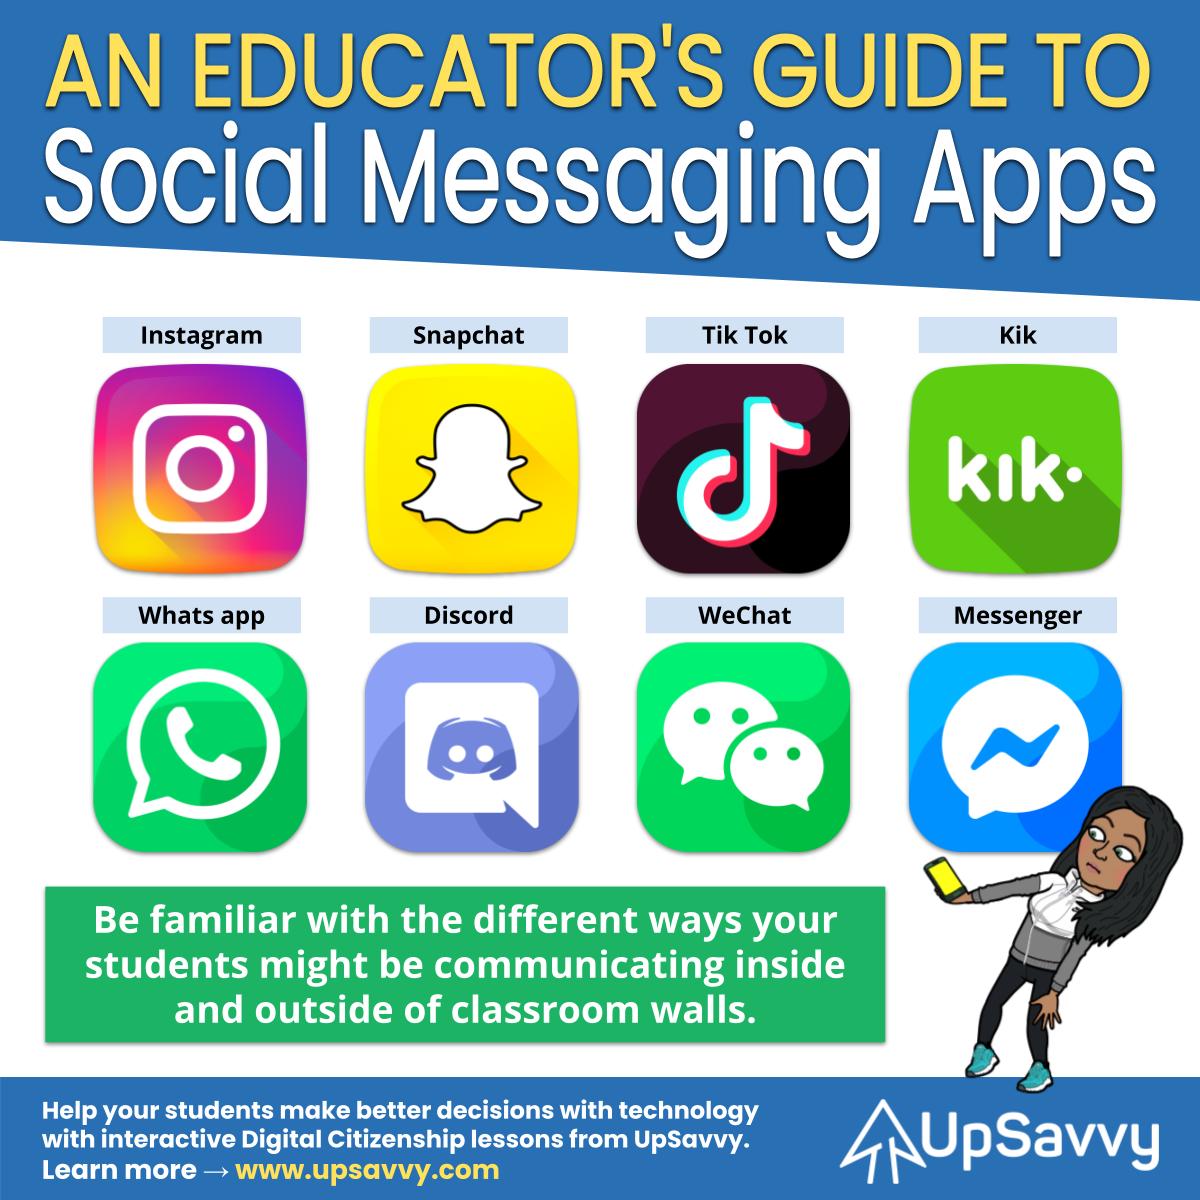 An Educator’s Guide to Social Messaging Apps